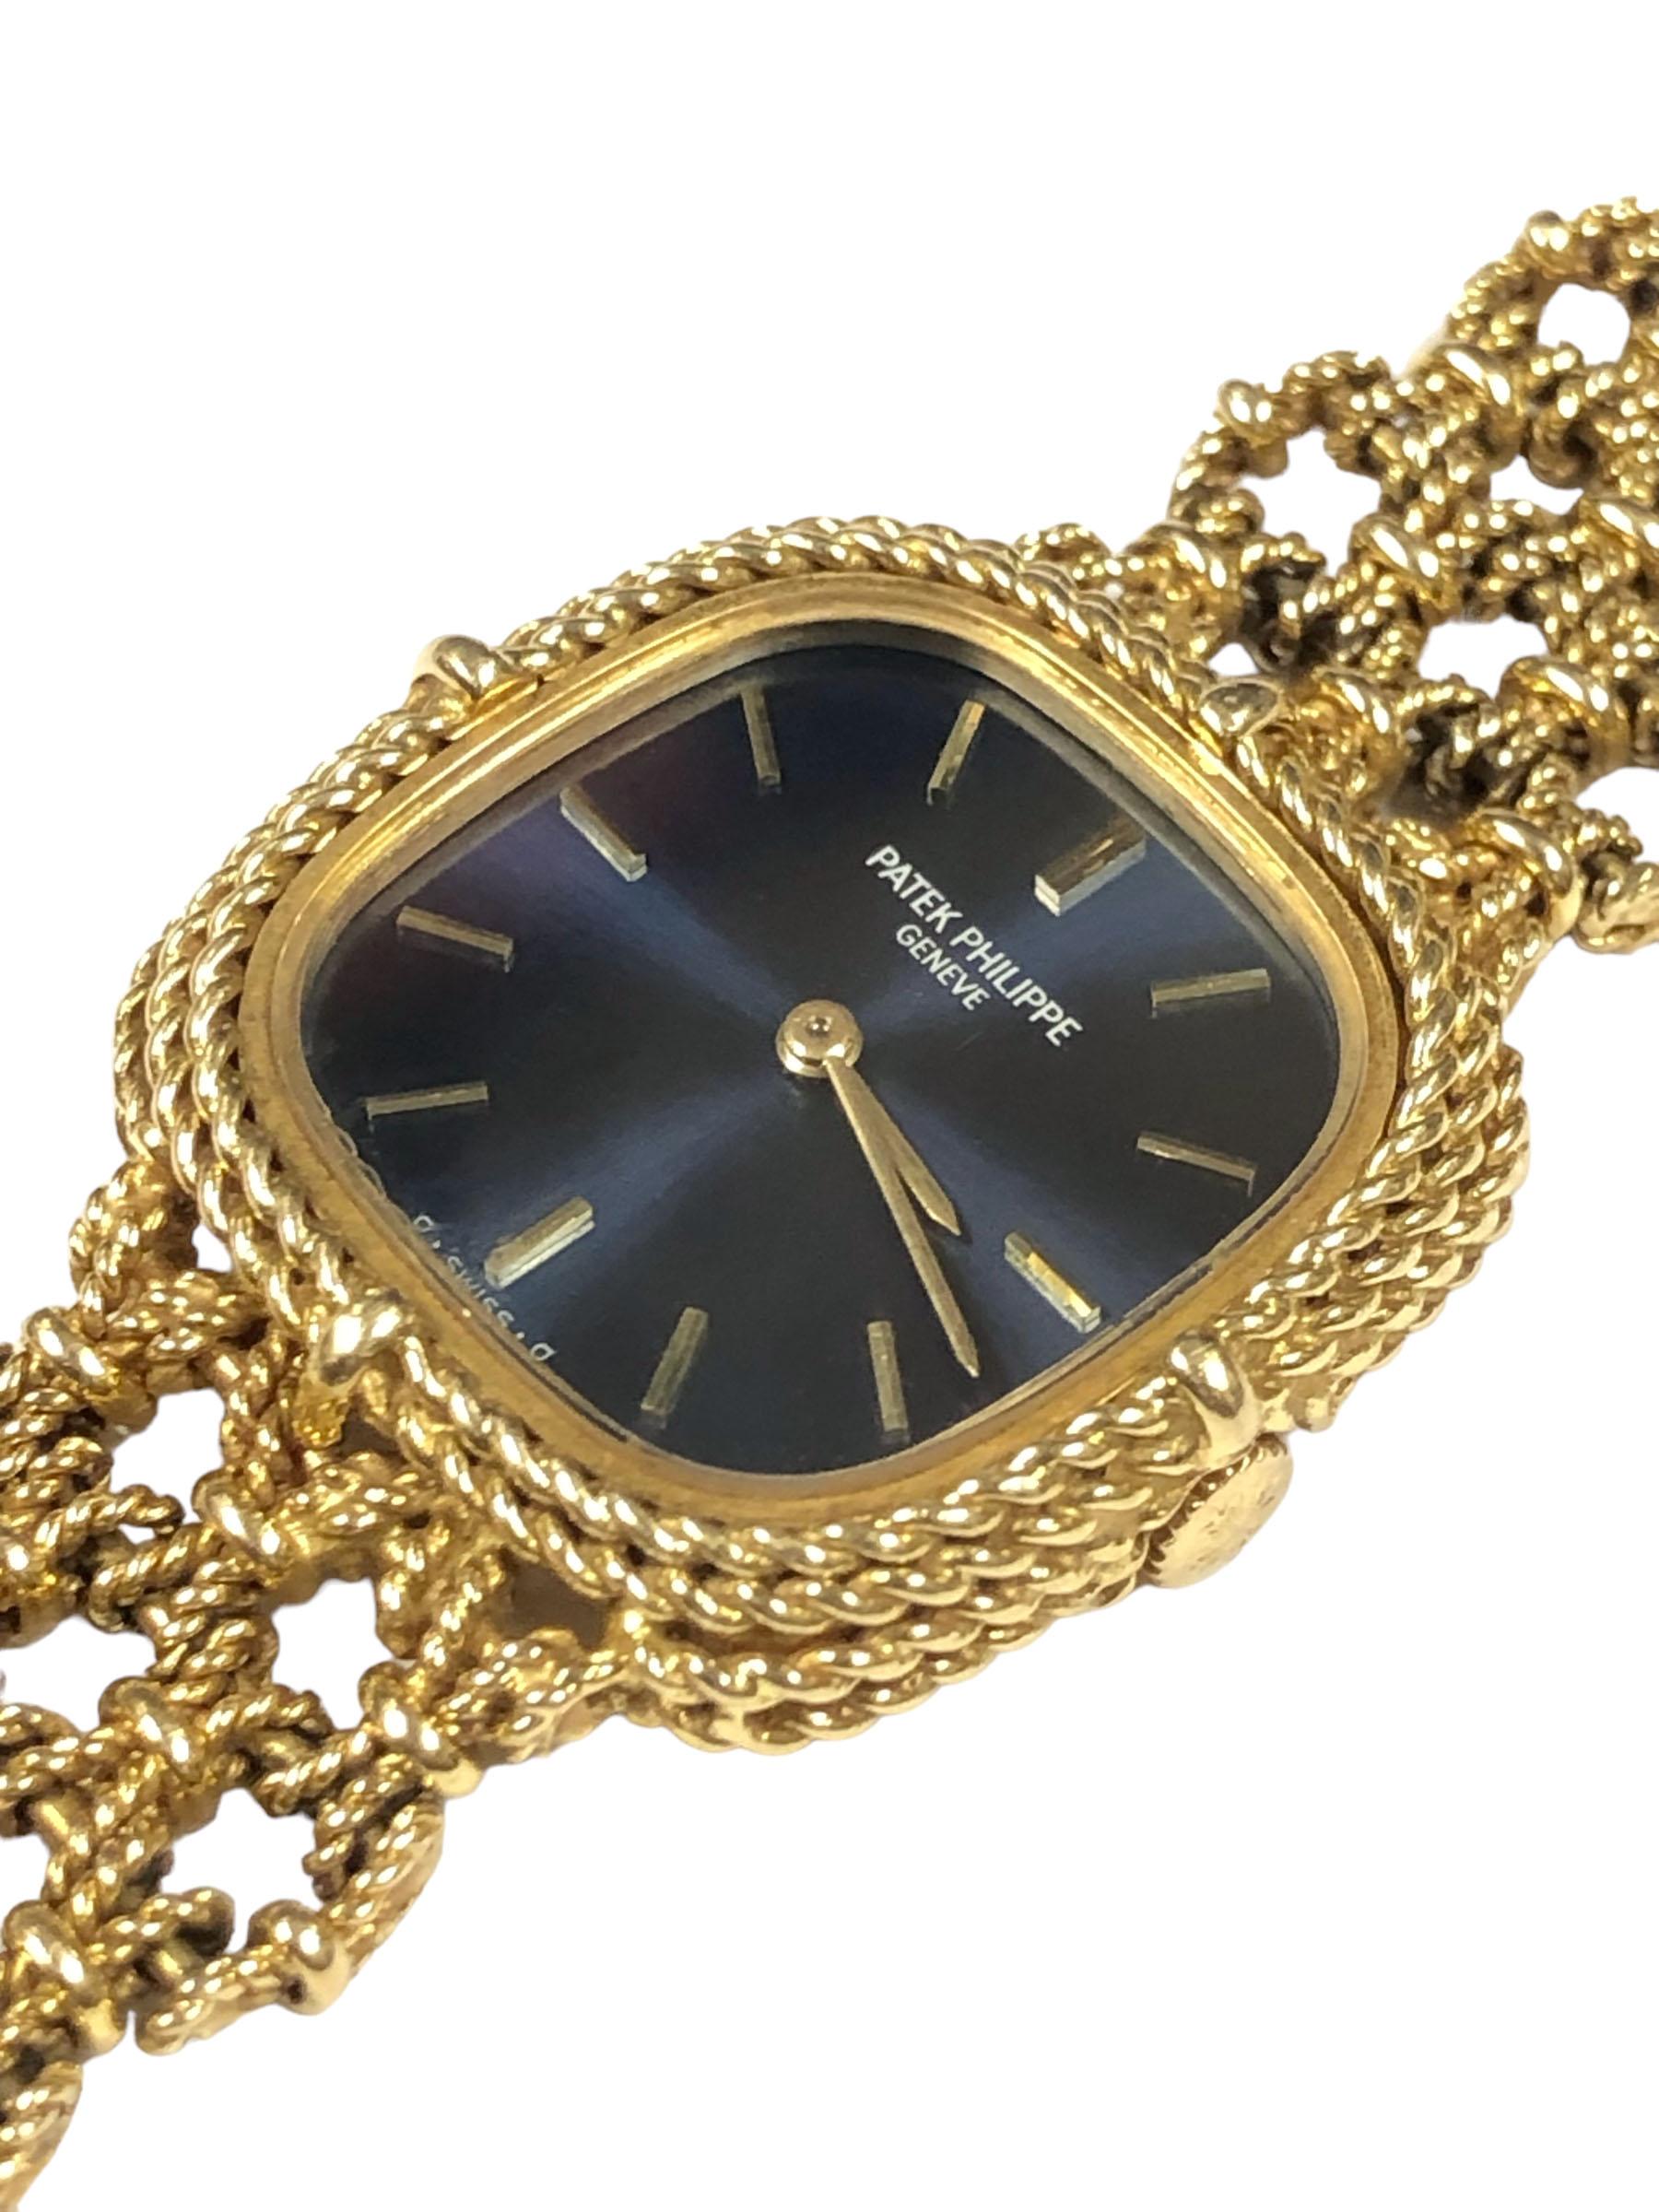 Circa 1970s Patek Philippe Reference 4265 Ladies wrist watch, 23 x 22 M.M 18k Yellow Gold Cushion shape 2 piece case with twisted Rope style case and bezel. 18 Jewel Mechanical, manual wind, Nickle Lever movement, Patek Philippe Logo Crown. Blue